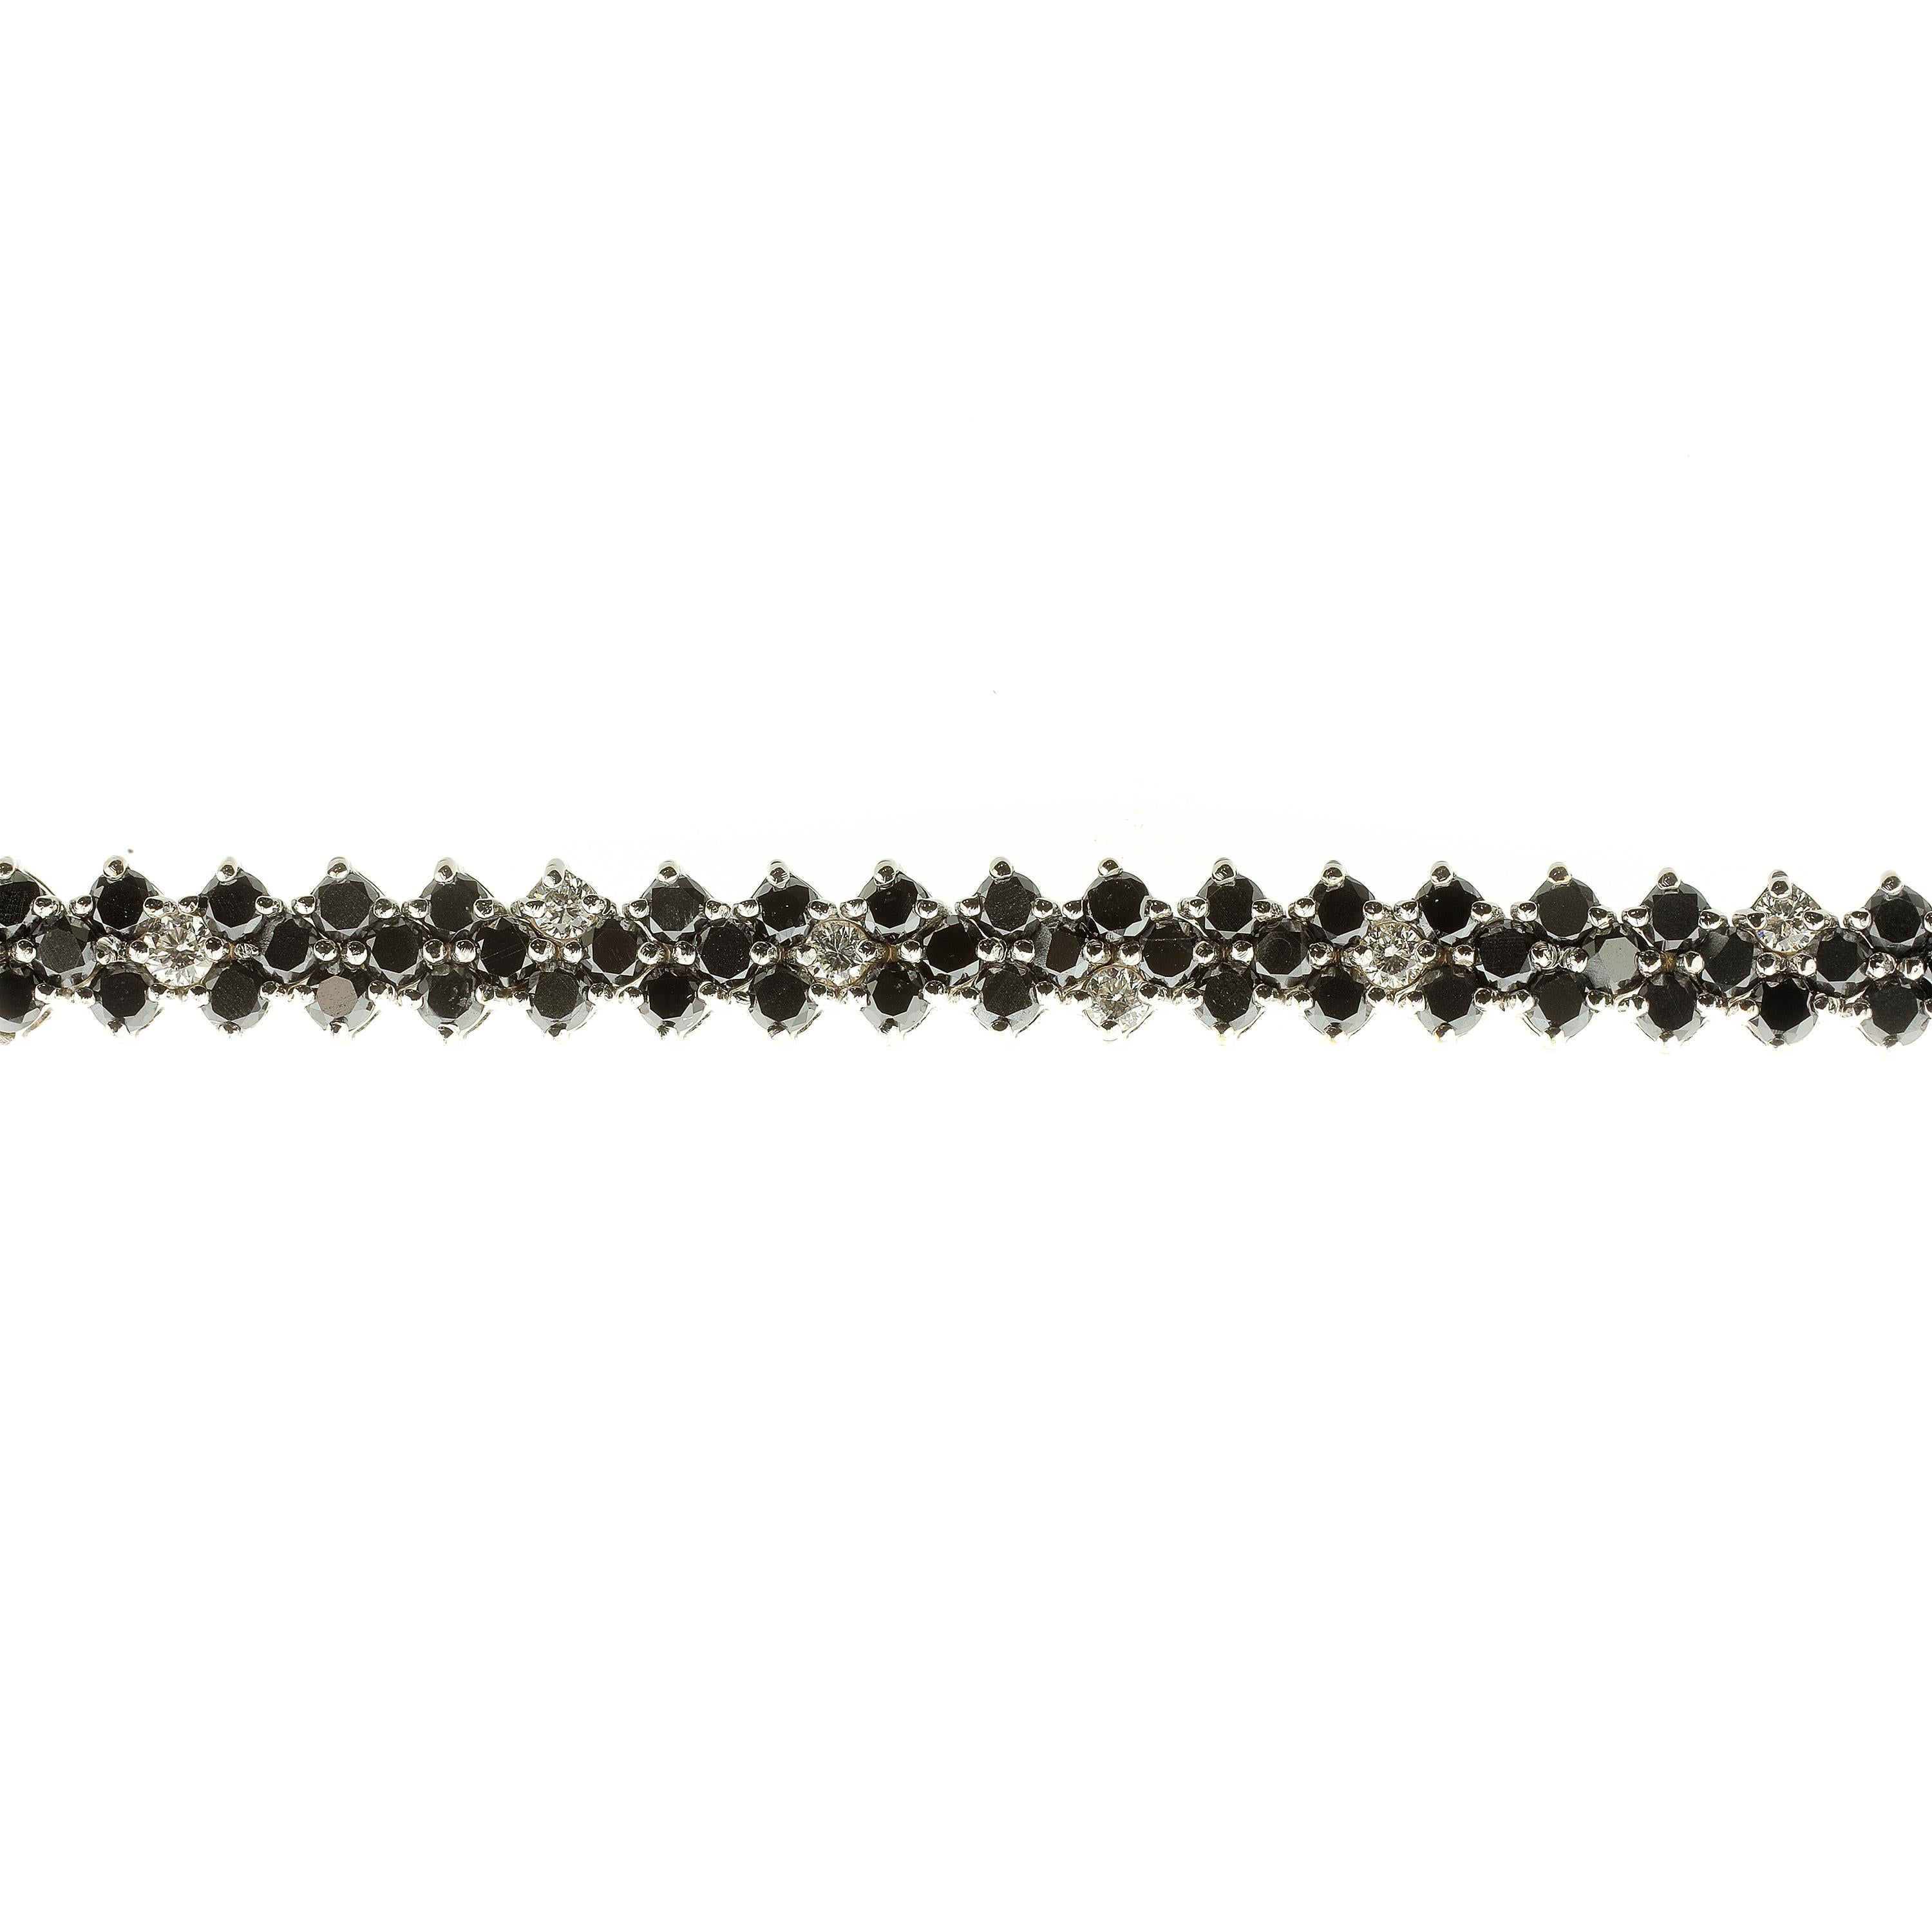 This tennis bracelet is a gorgeous accessory for any day of the week. Made from 18-karat white gold and set with white diamonds rated F/G VVS and 4.26-carats of black diamonds. This is a wonderful take on the original style of diamond tennis